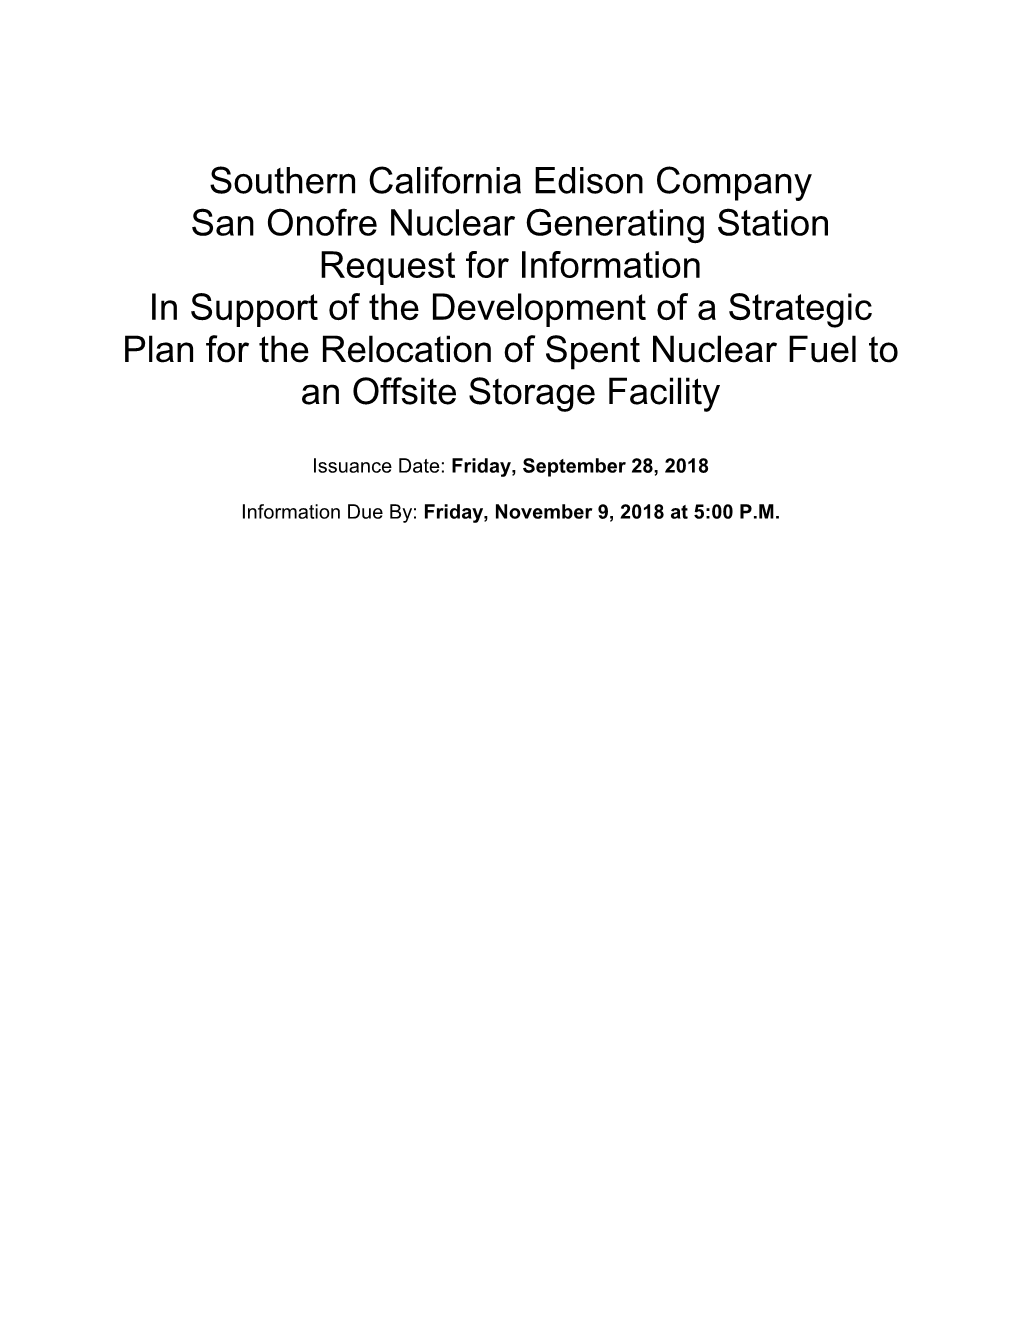 Southern California Edison Company San Onofre Nuclear Generating